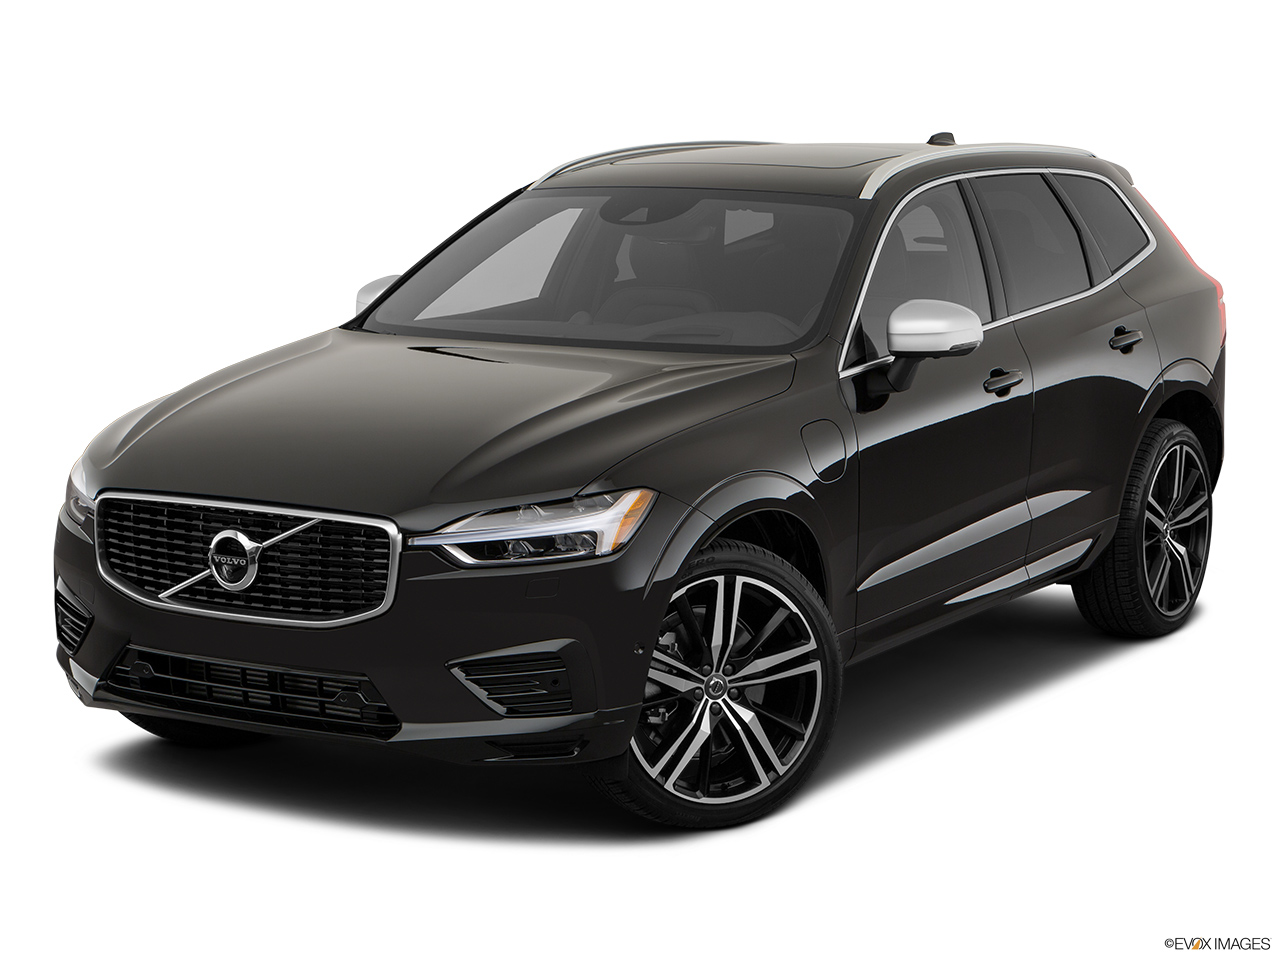 2019 Volvo XC60 T8 R-Design eAWD Plug-in Hybrid Front angle view. 